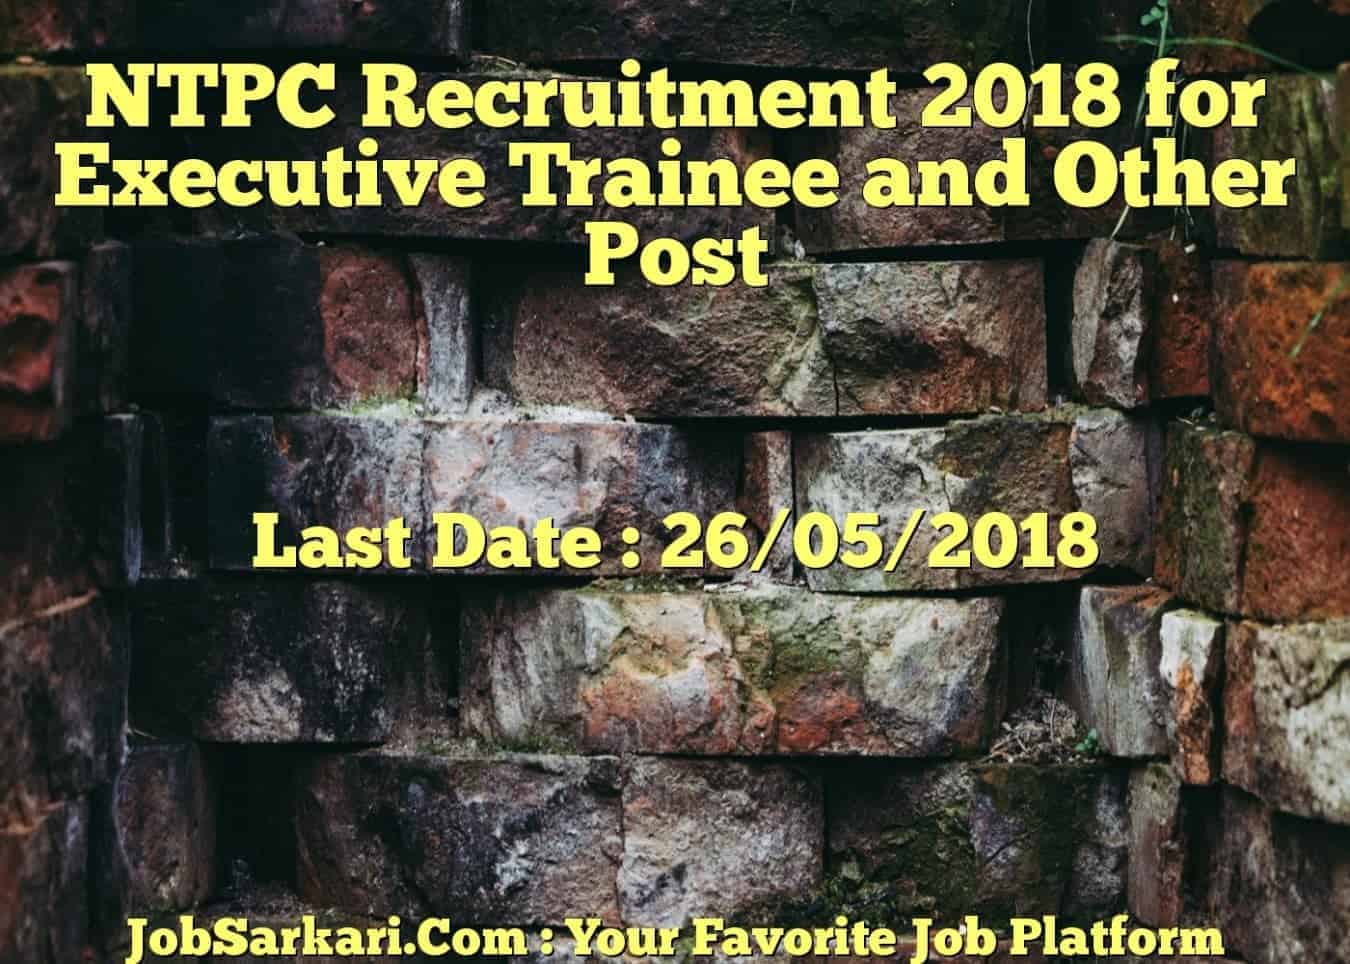 NTPC Recruitment 2018 for Executive Trainee and Other Post